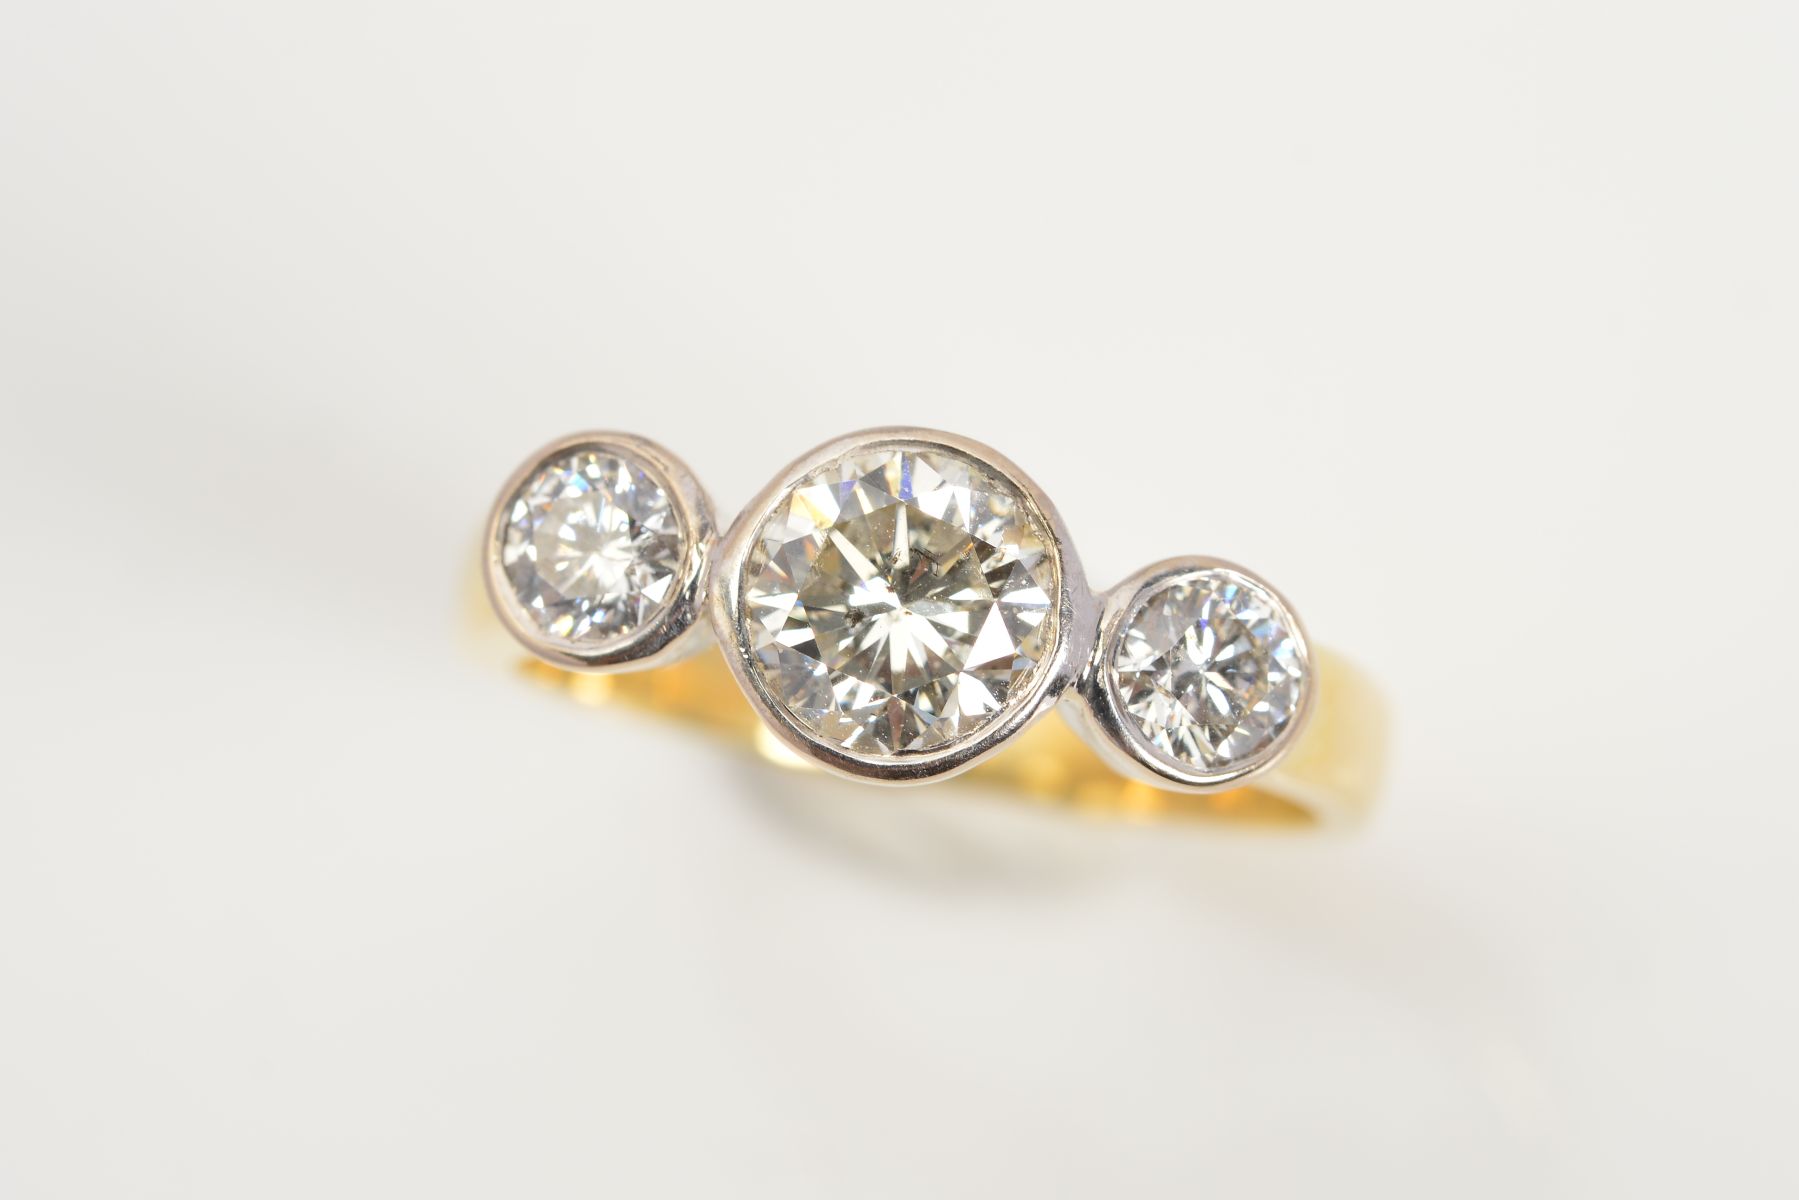 AN 18CT GOLD THREE STONE DIAMOND RING, designed as three brilliant cut diamonds within collet - Image 4 of 6